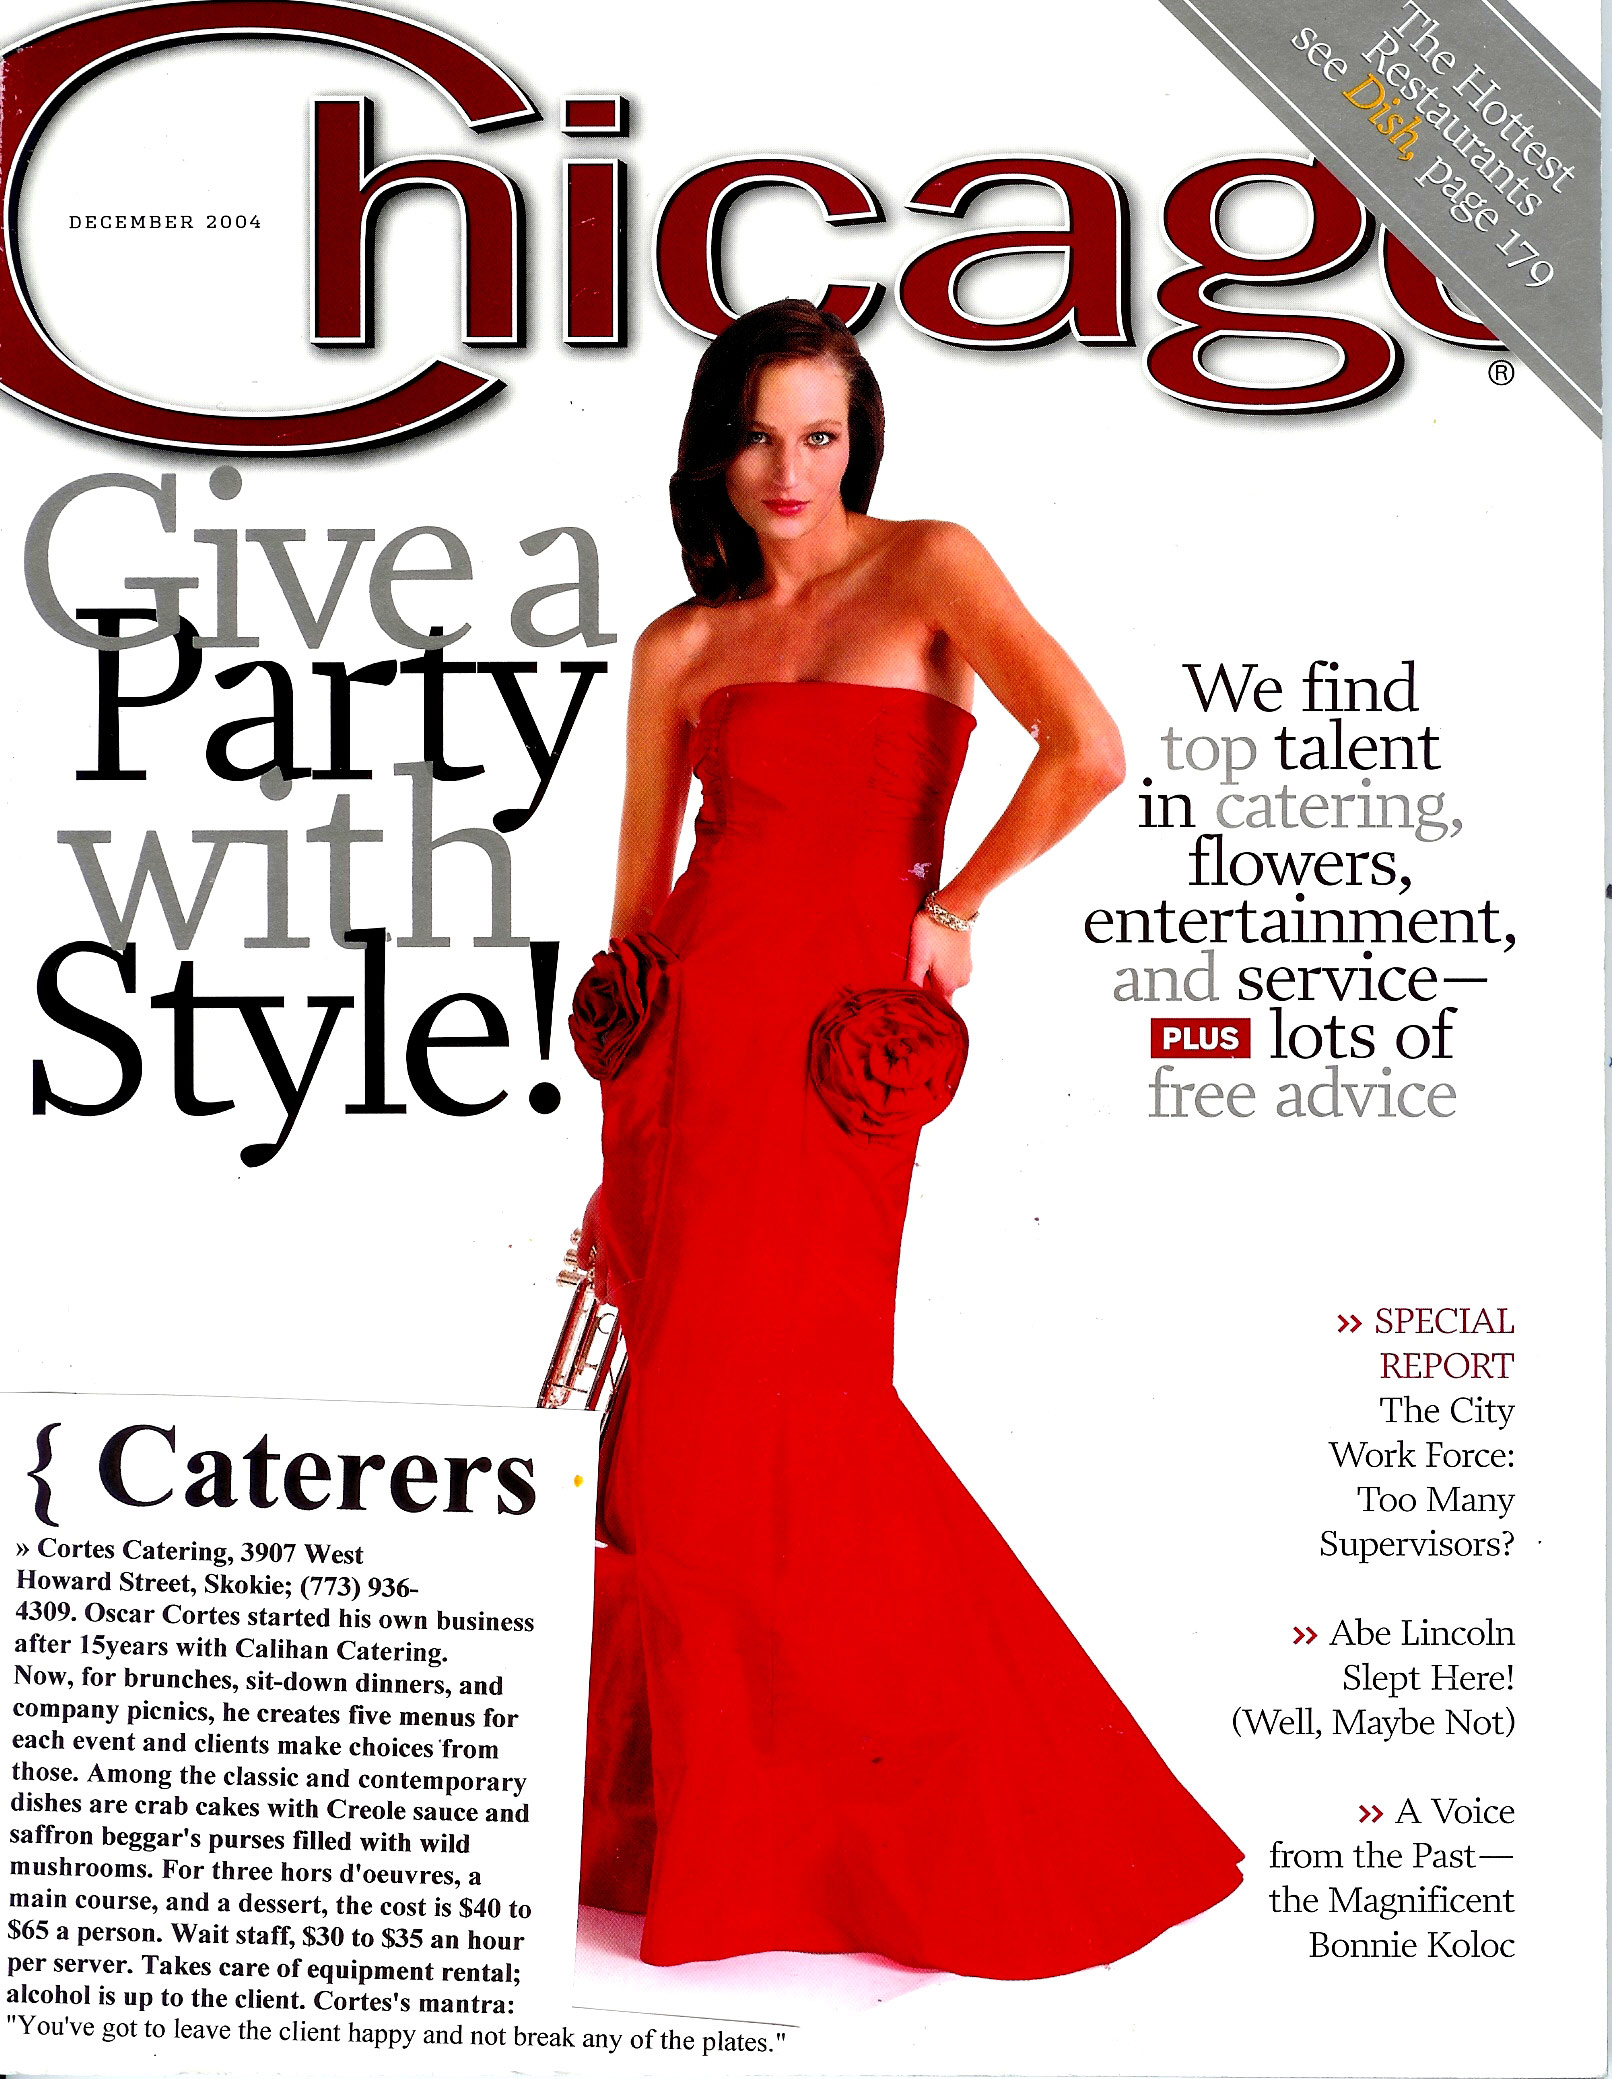 cortes-catering-chicago-magazine-recognition